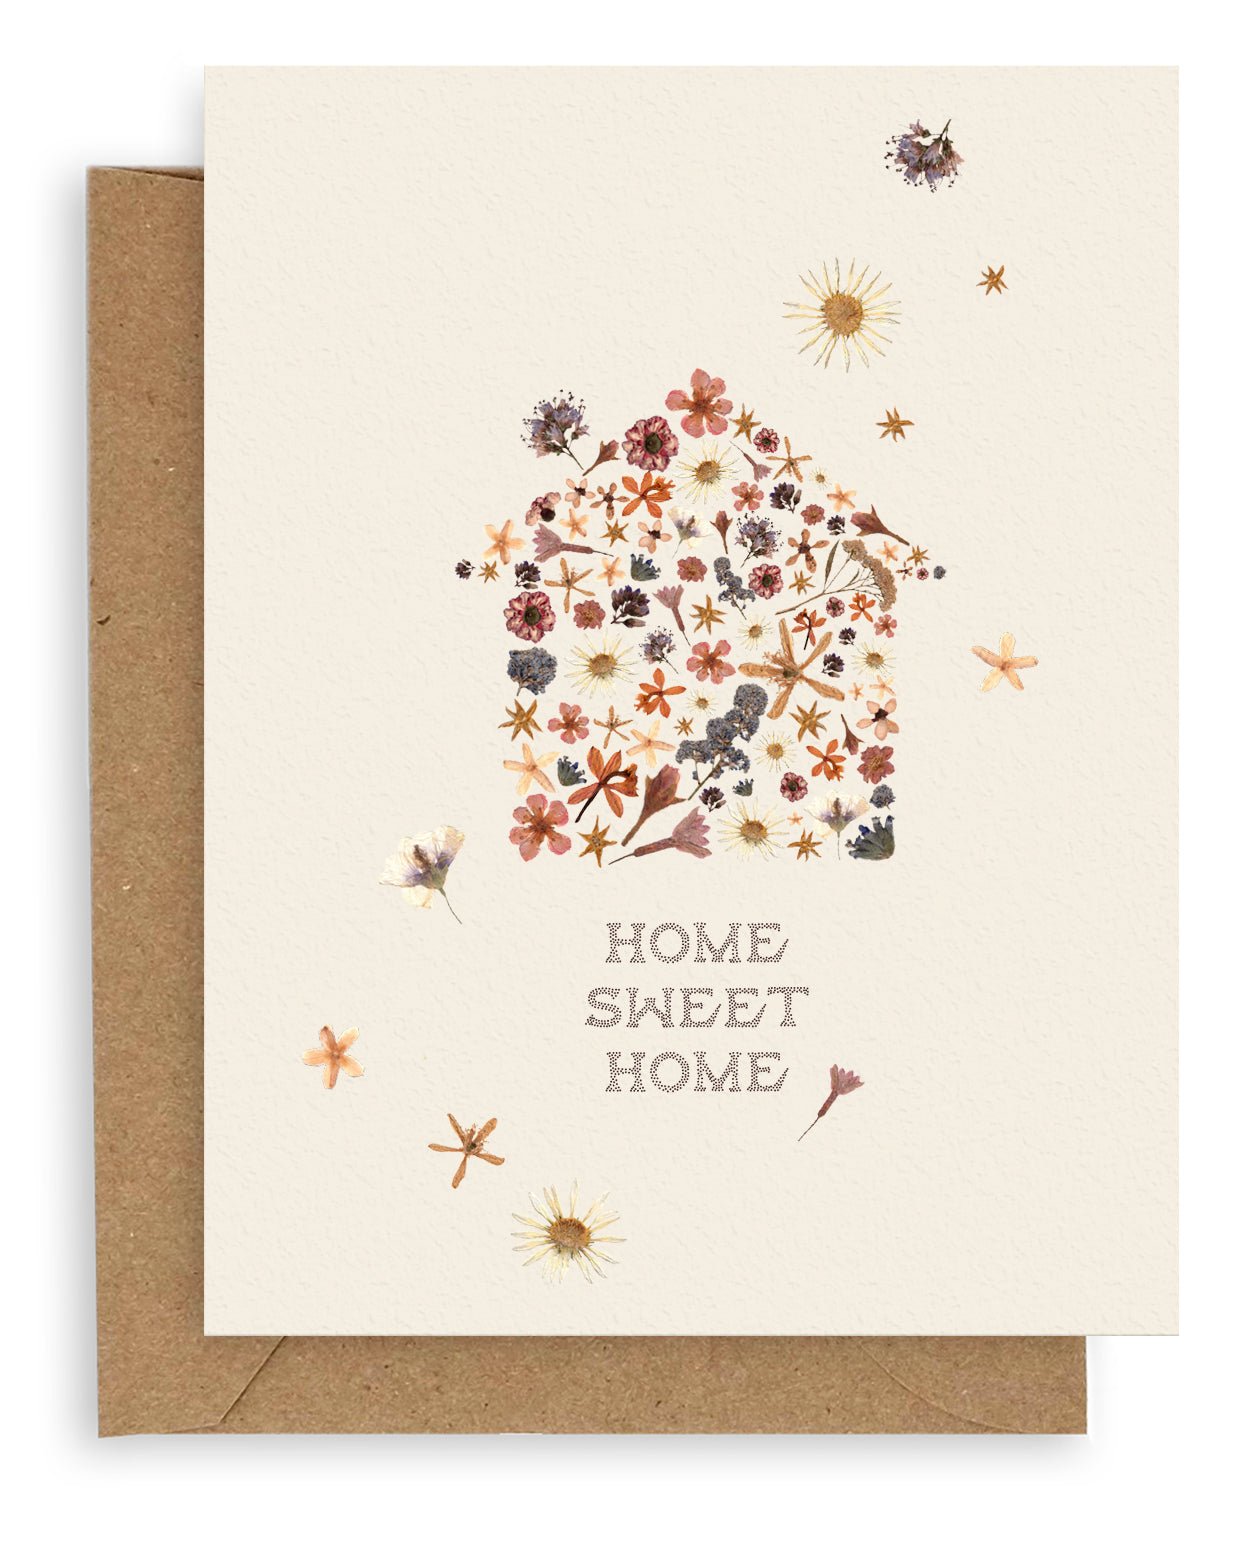 Cream colored background with pressed flowers scattered across dried flora constructed in the shape of a house with the words &quot;Home Sweet Home&quot; printed below. Shown with Kraft envelope.